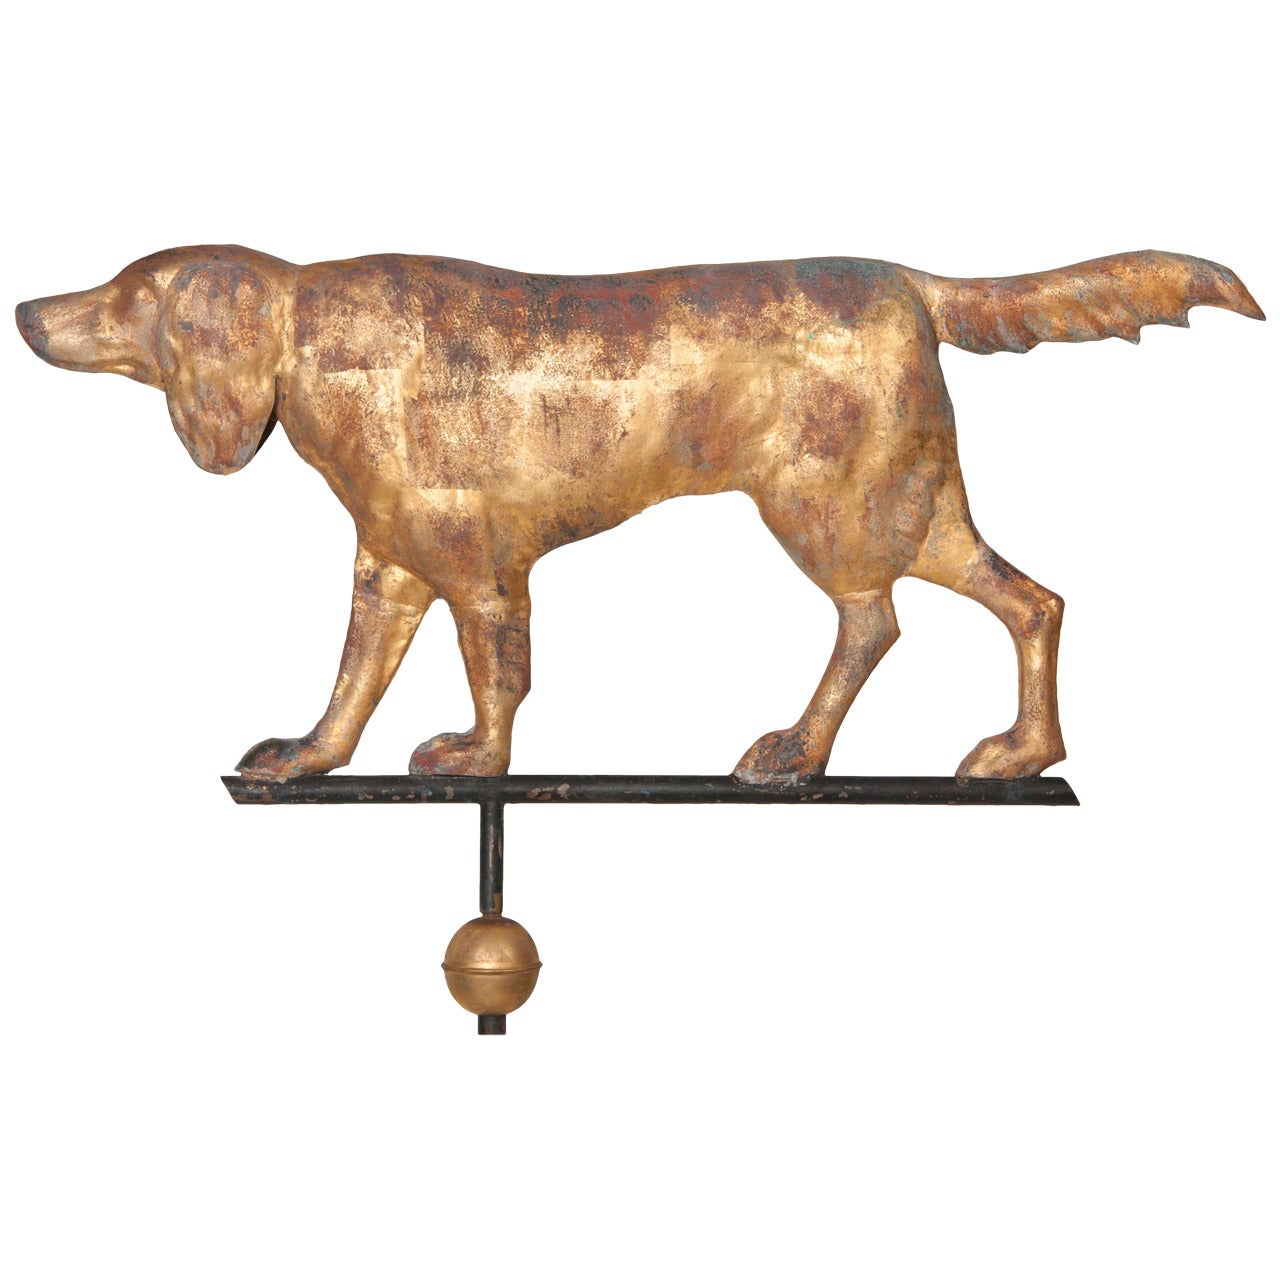 Massachusetts Full-Bodied Setter Weather Vane with All Original Elements